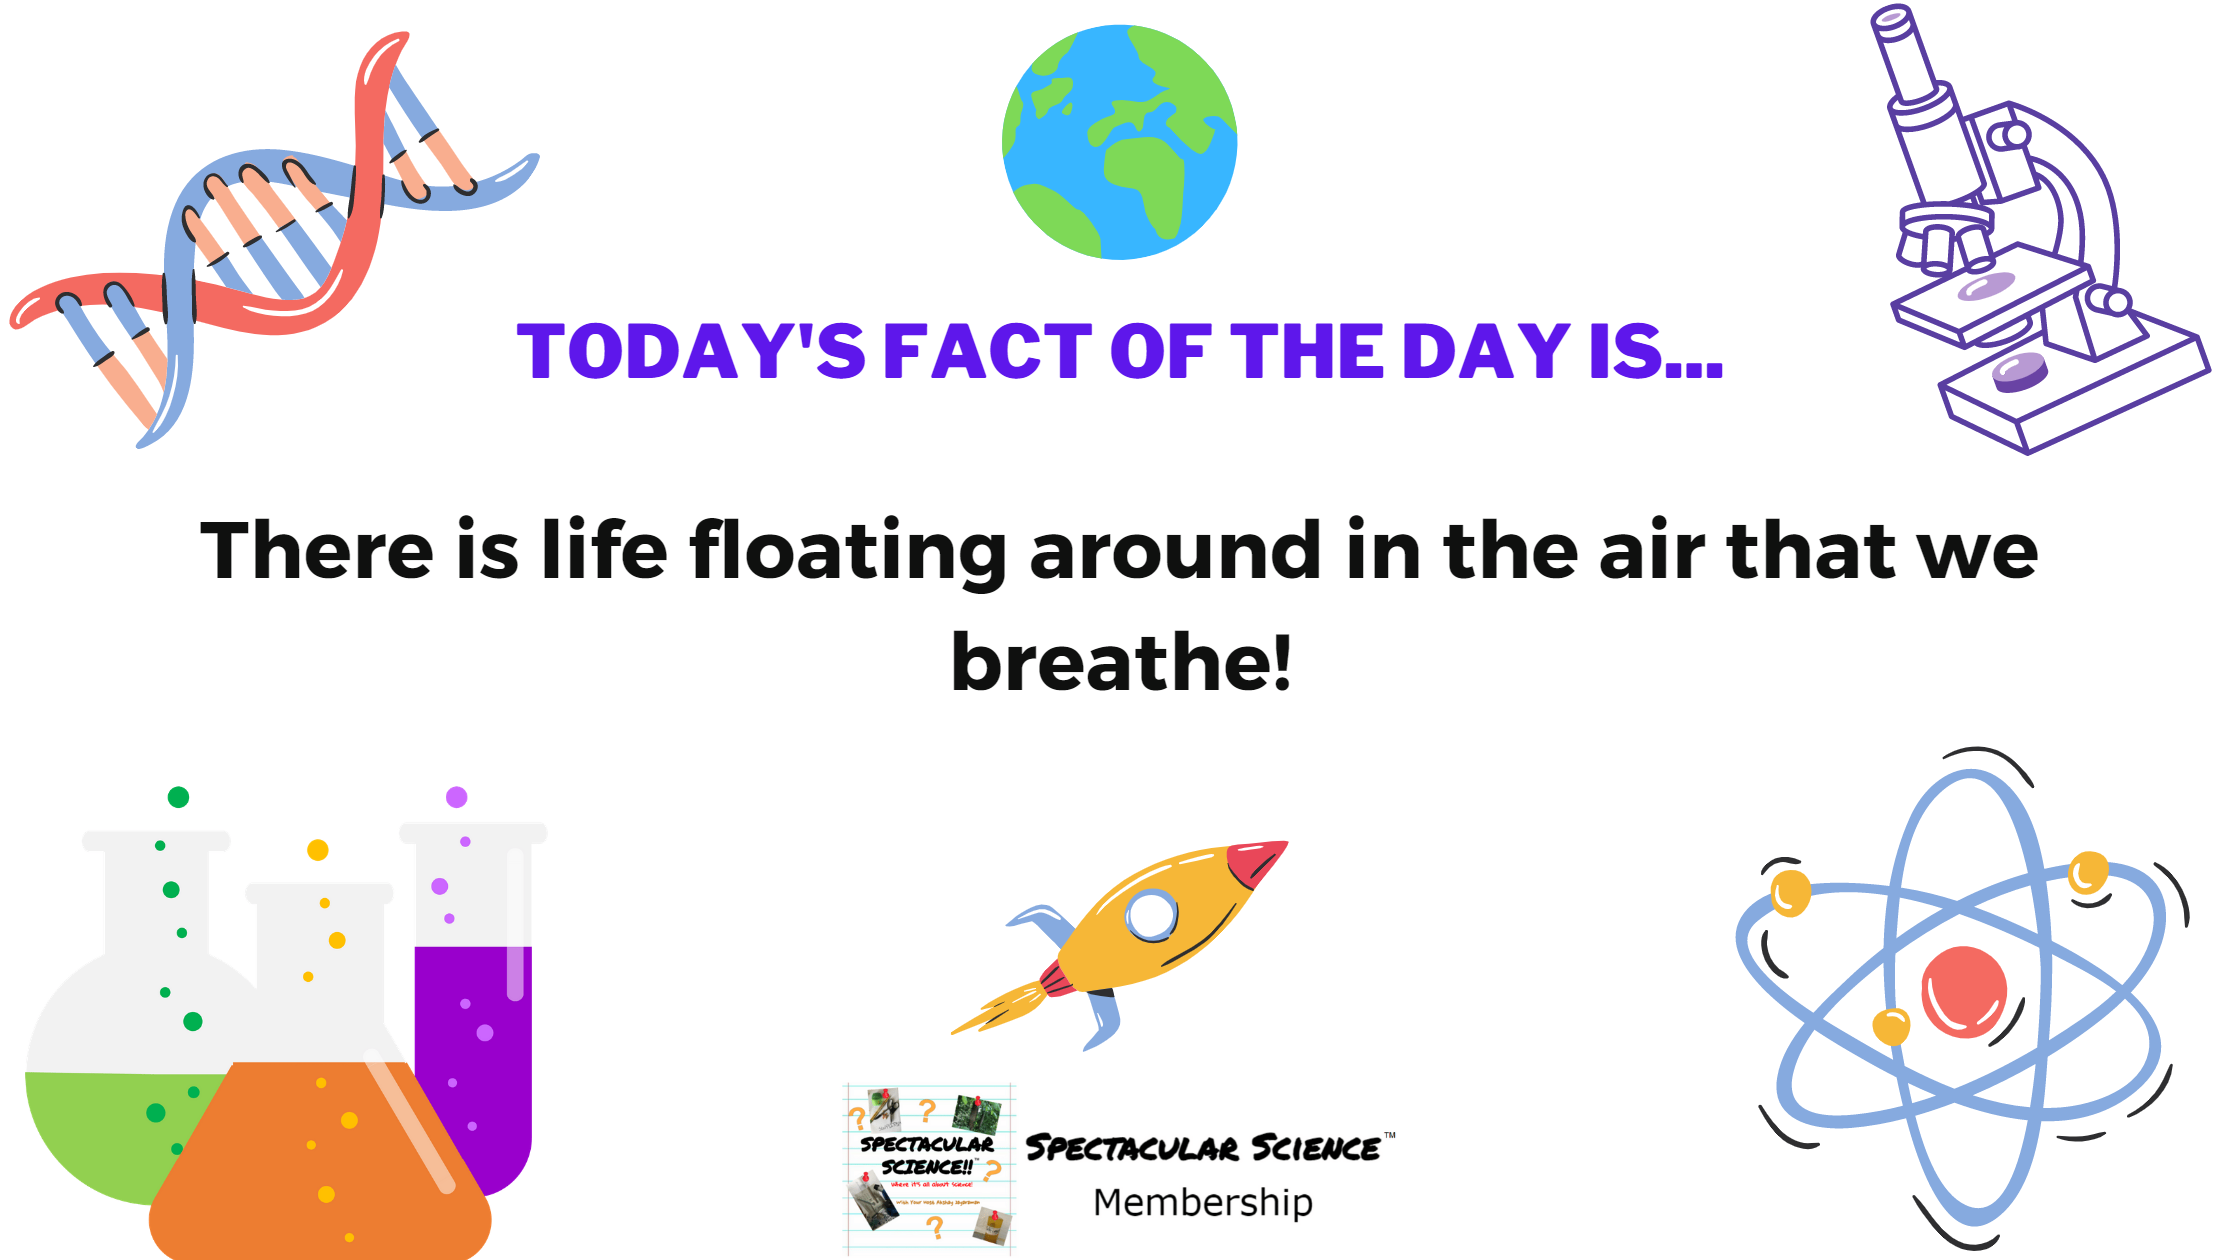 Fact of the Day Image November 30th